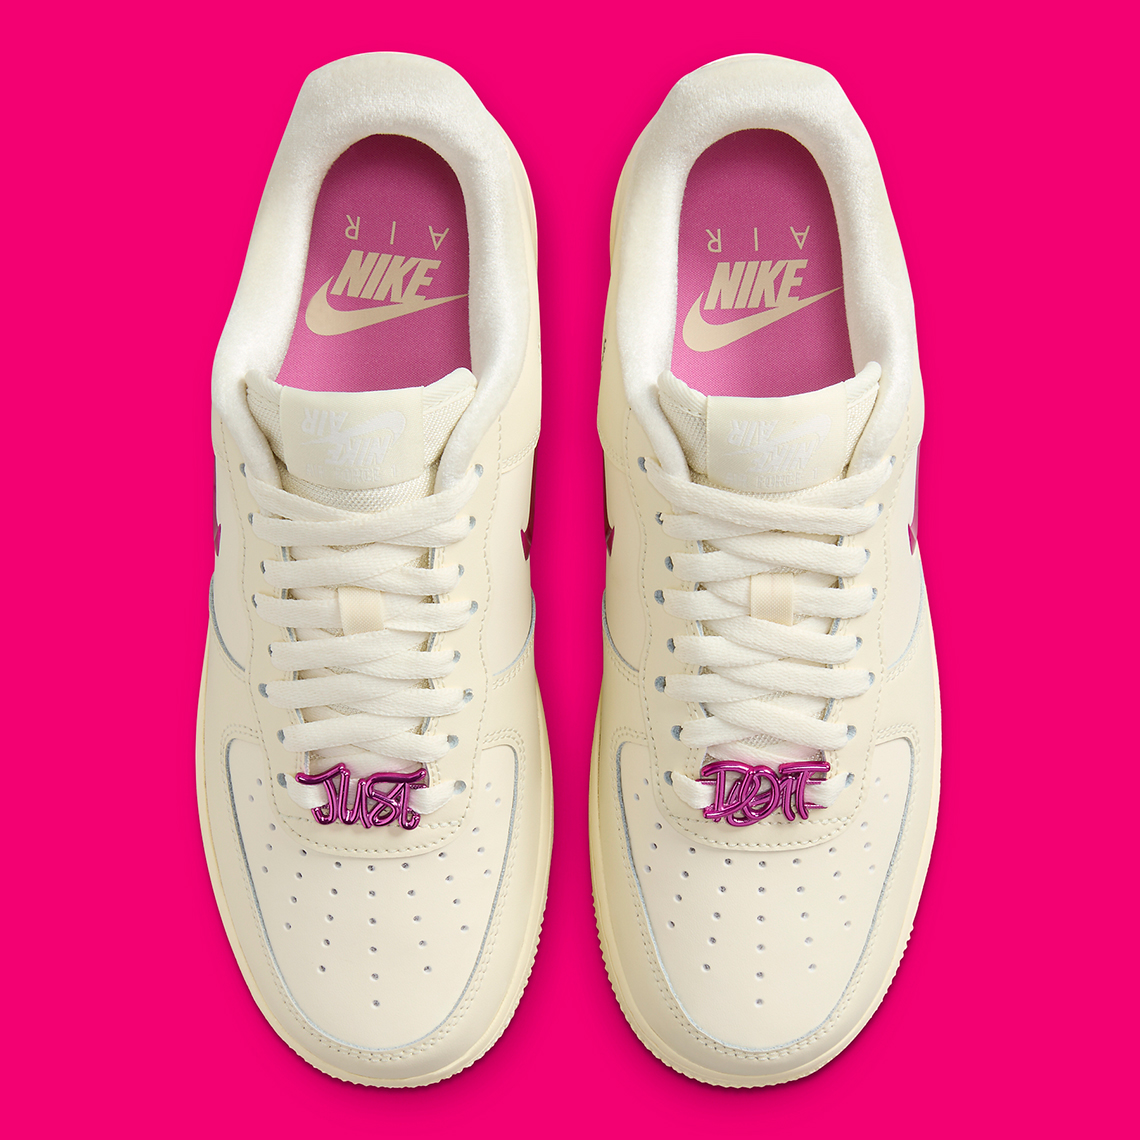 Nike Air Force 1 Low Just Do It Coconut Milk Playful Pink Alabaster Fb8251 101 10